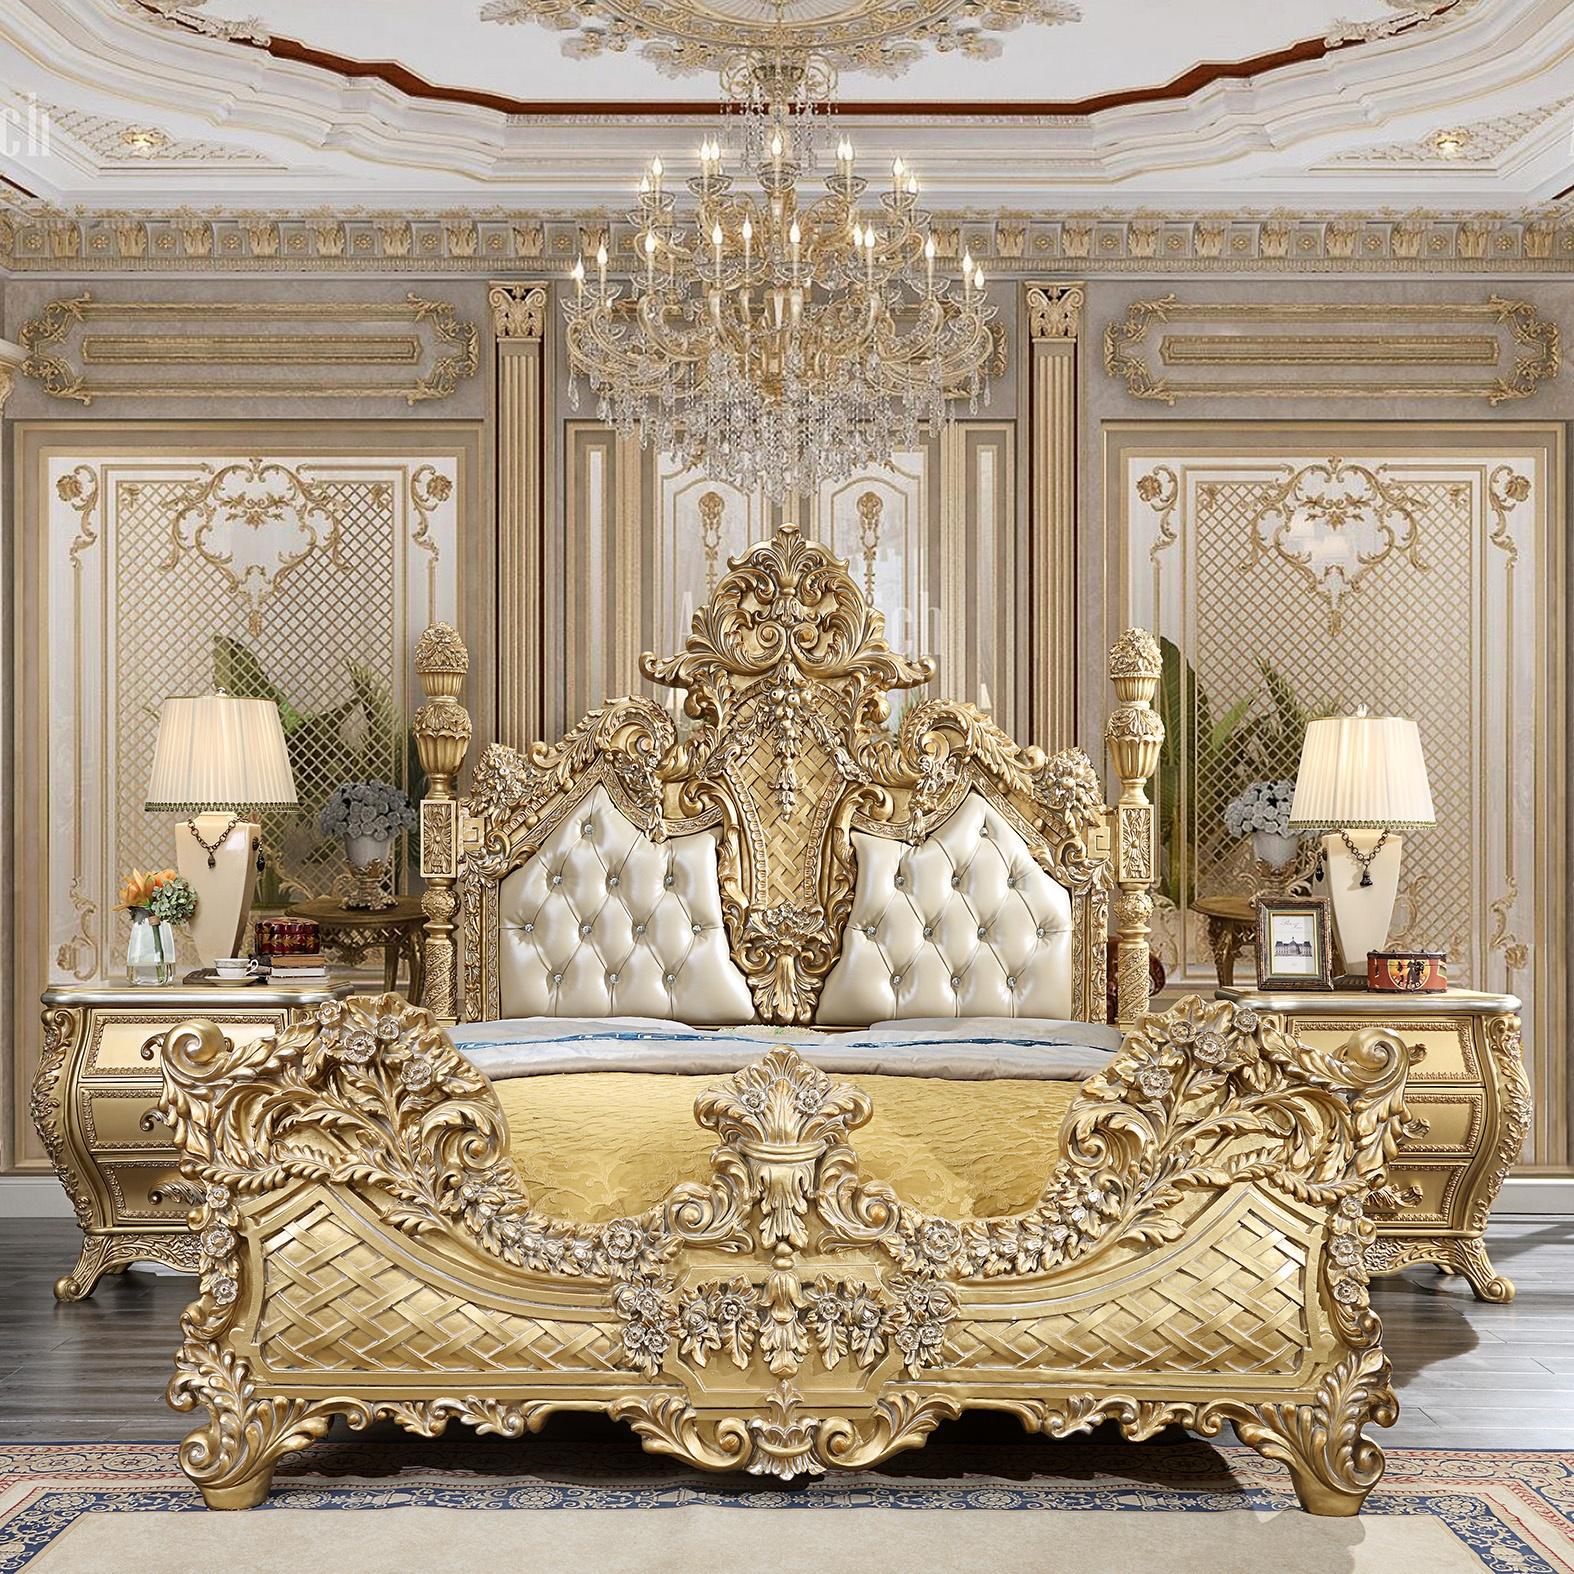 Traditional Panel Bed HD-1801 HD-EK1801 in Metallic, Gold Finish, Antique Leather